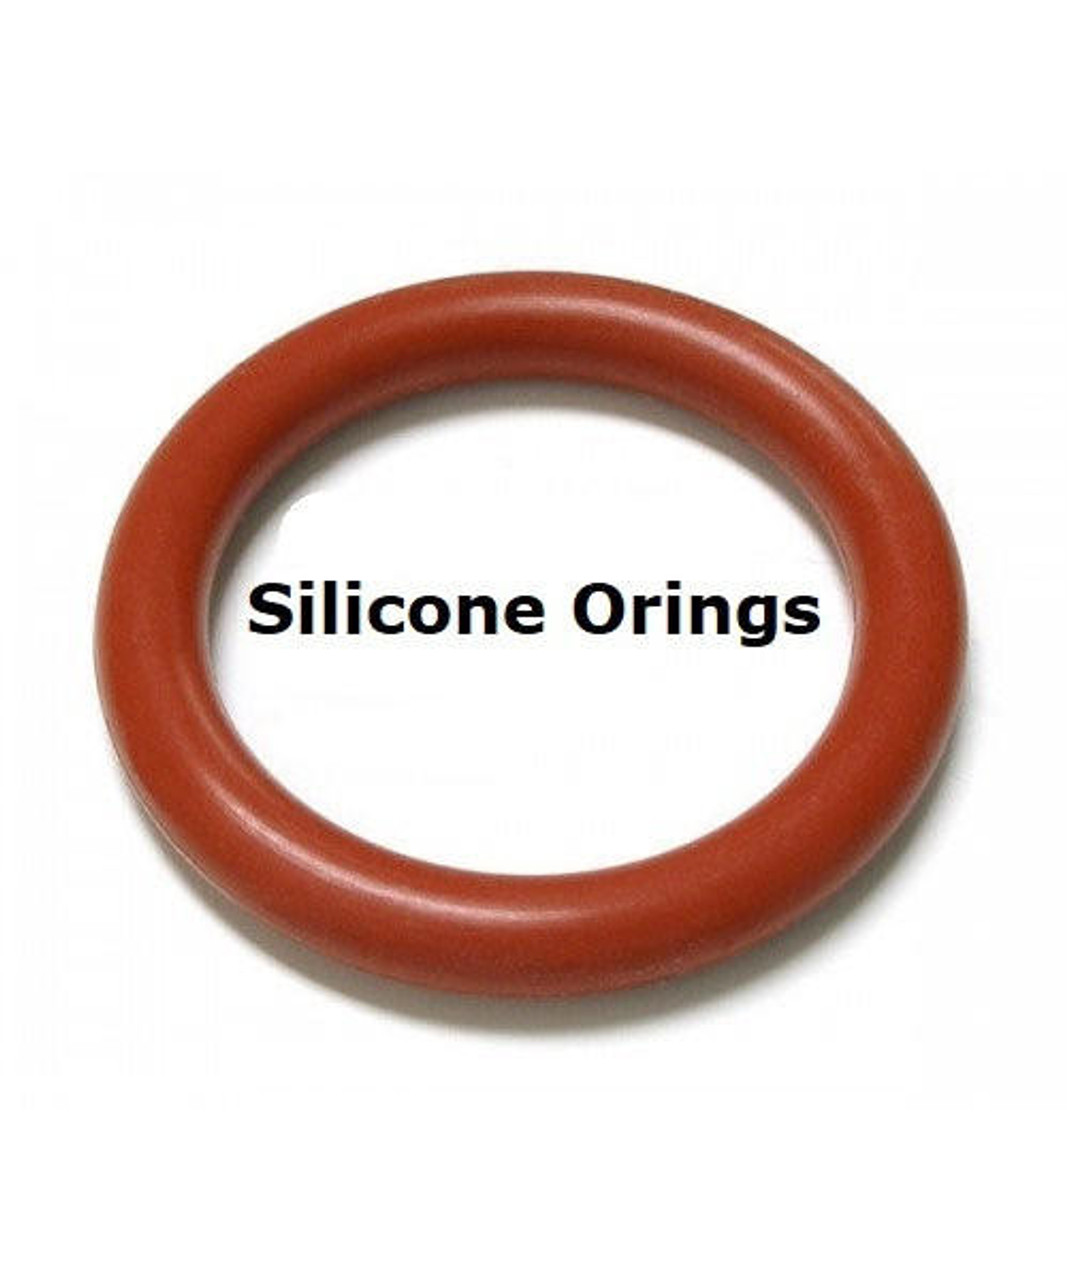 Silicone O-rings Size 421 Price for 1 pc